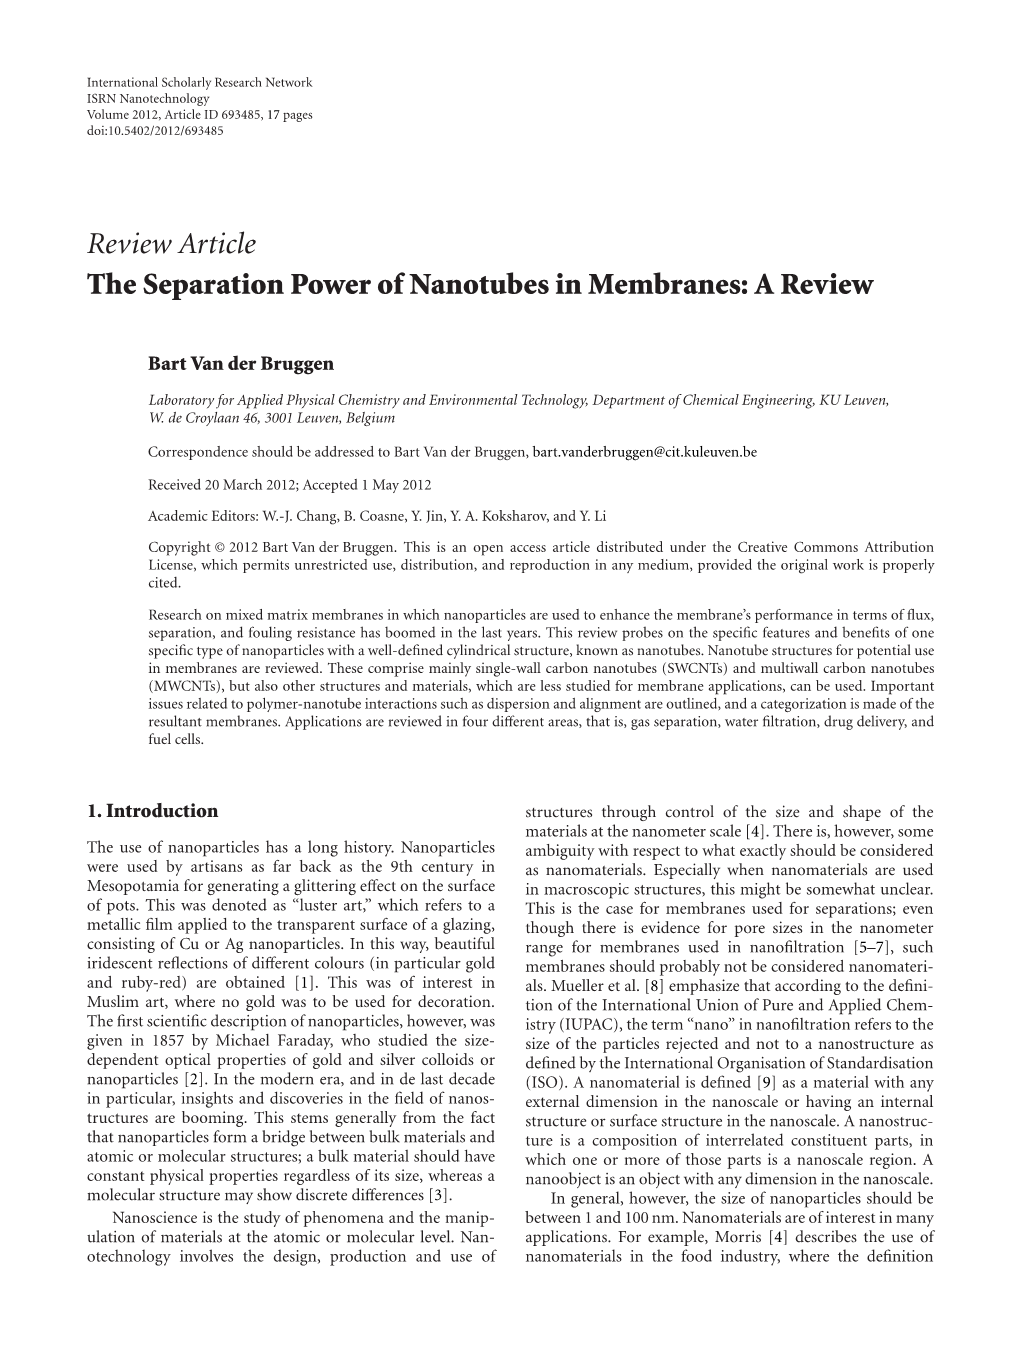 Review Article the Separation Power of Nanotubes in Membranes: a Review